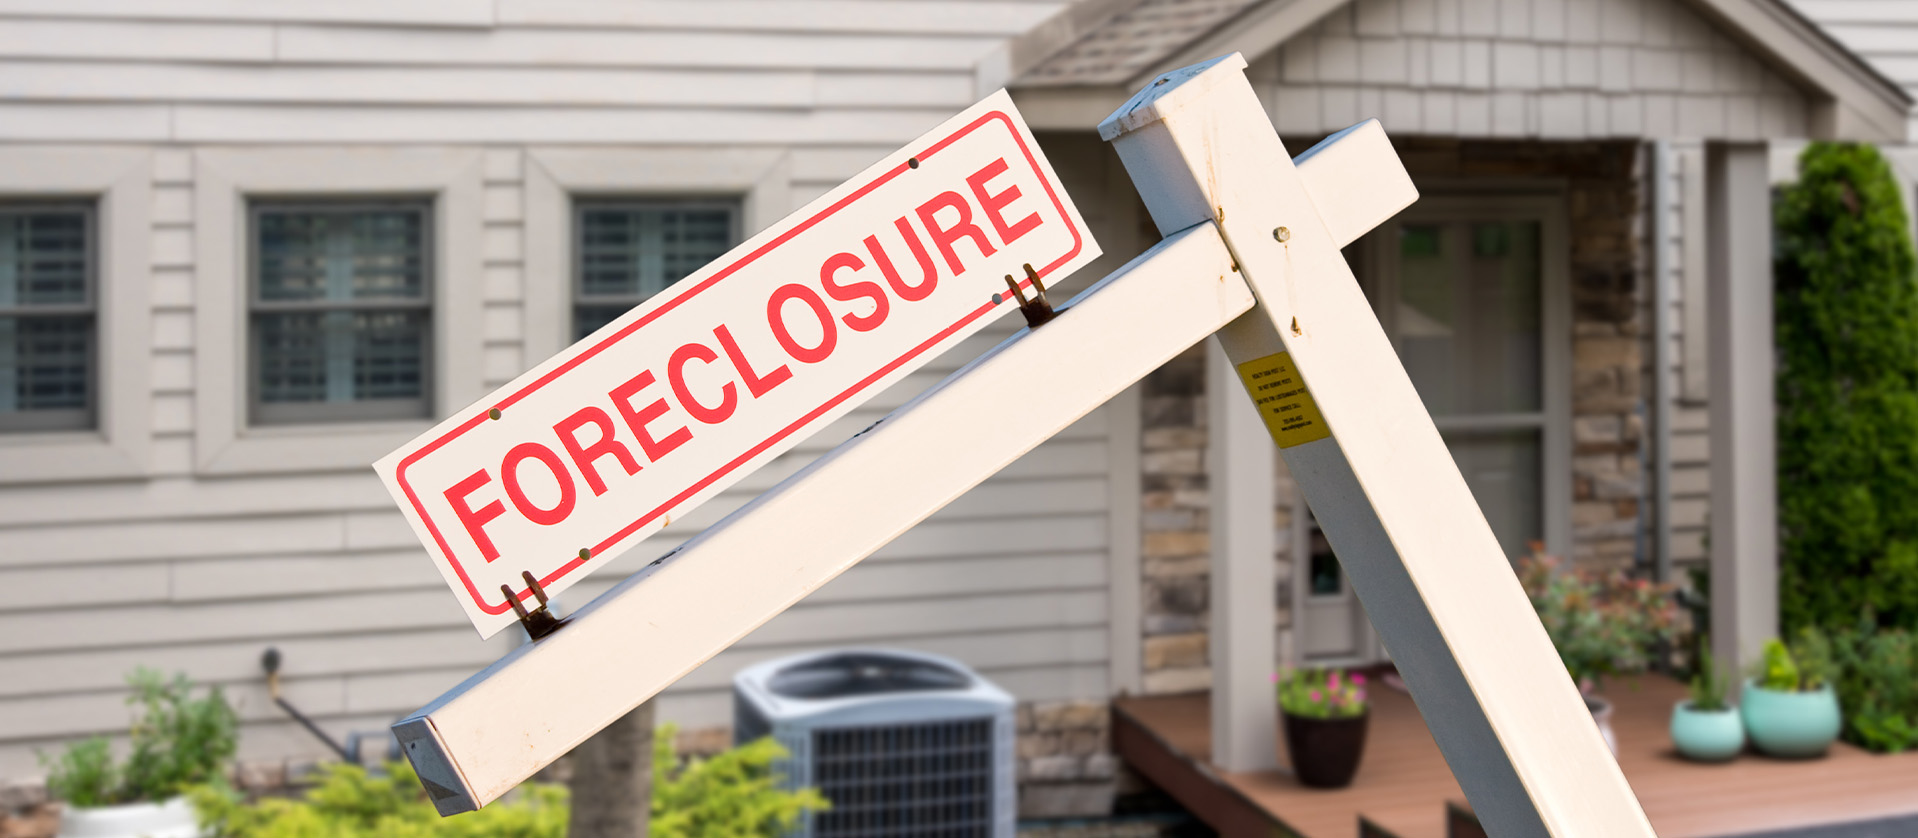 Mockup of a foreclosure sign in front of a modern townhome